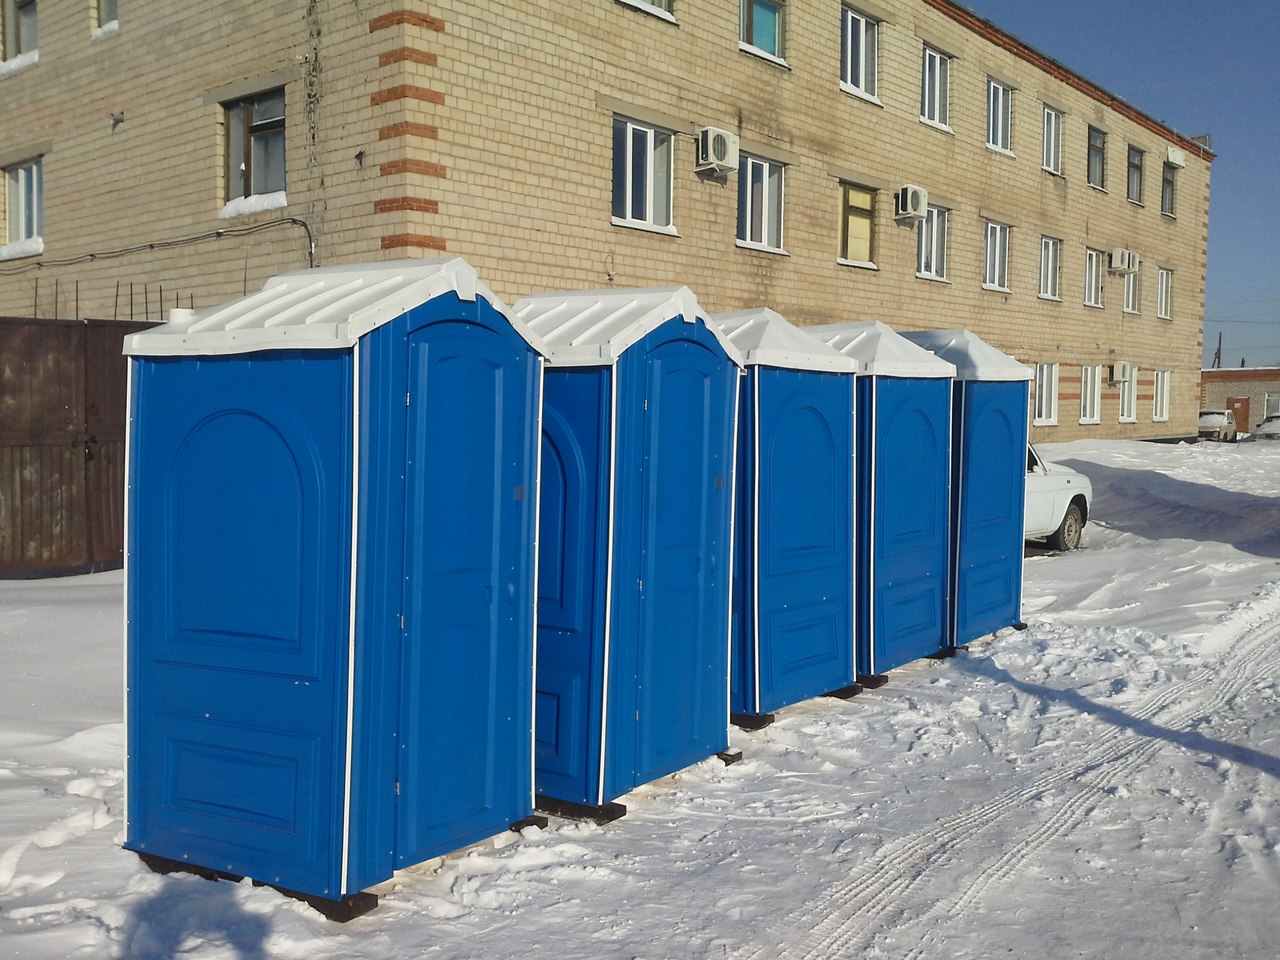 Benefits of Portable Restroom Rental: Promoting Hygiene and Safety at Public Events